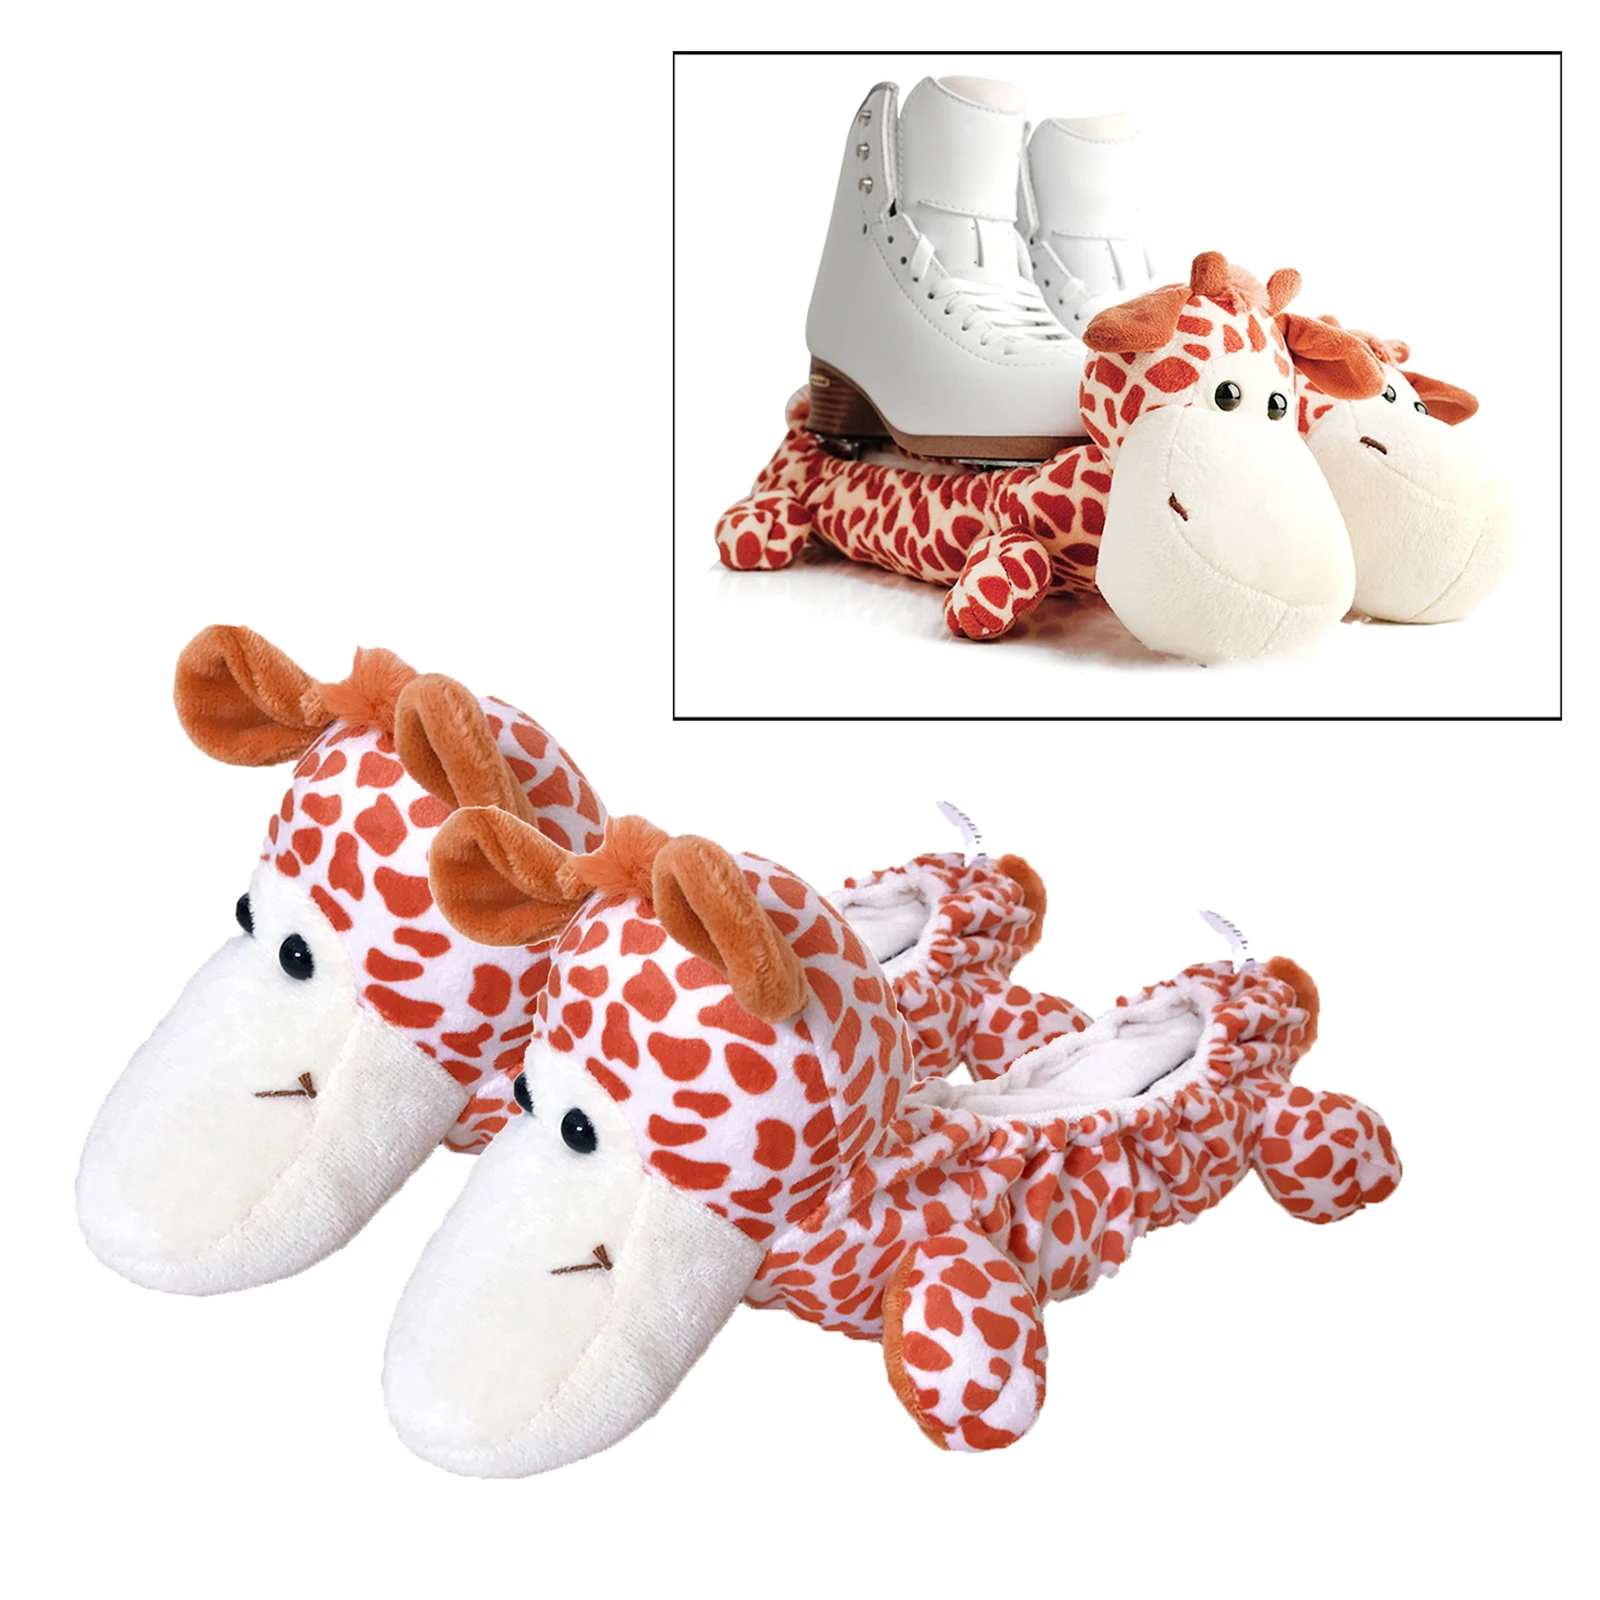 Details about   Skates  Soaker Animal Figure Skates  Protector Blade Cover Protection 